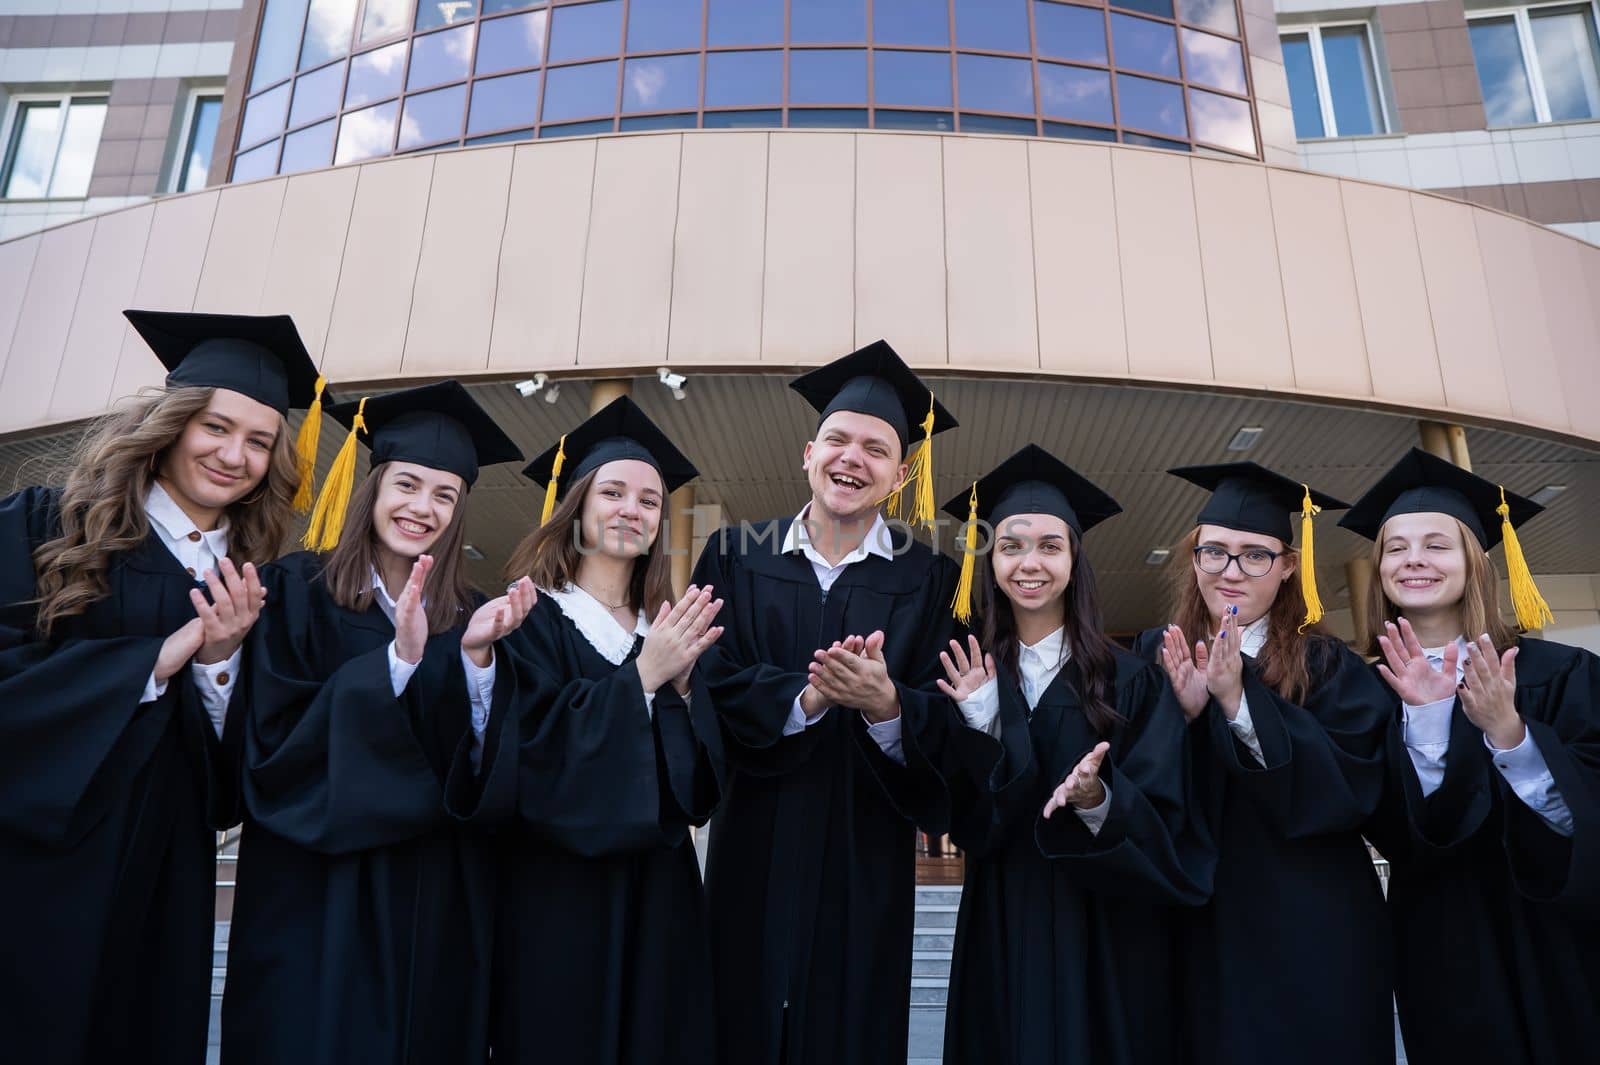 Seven graduates in robes stand in a row and clap outdoors